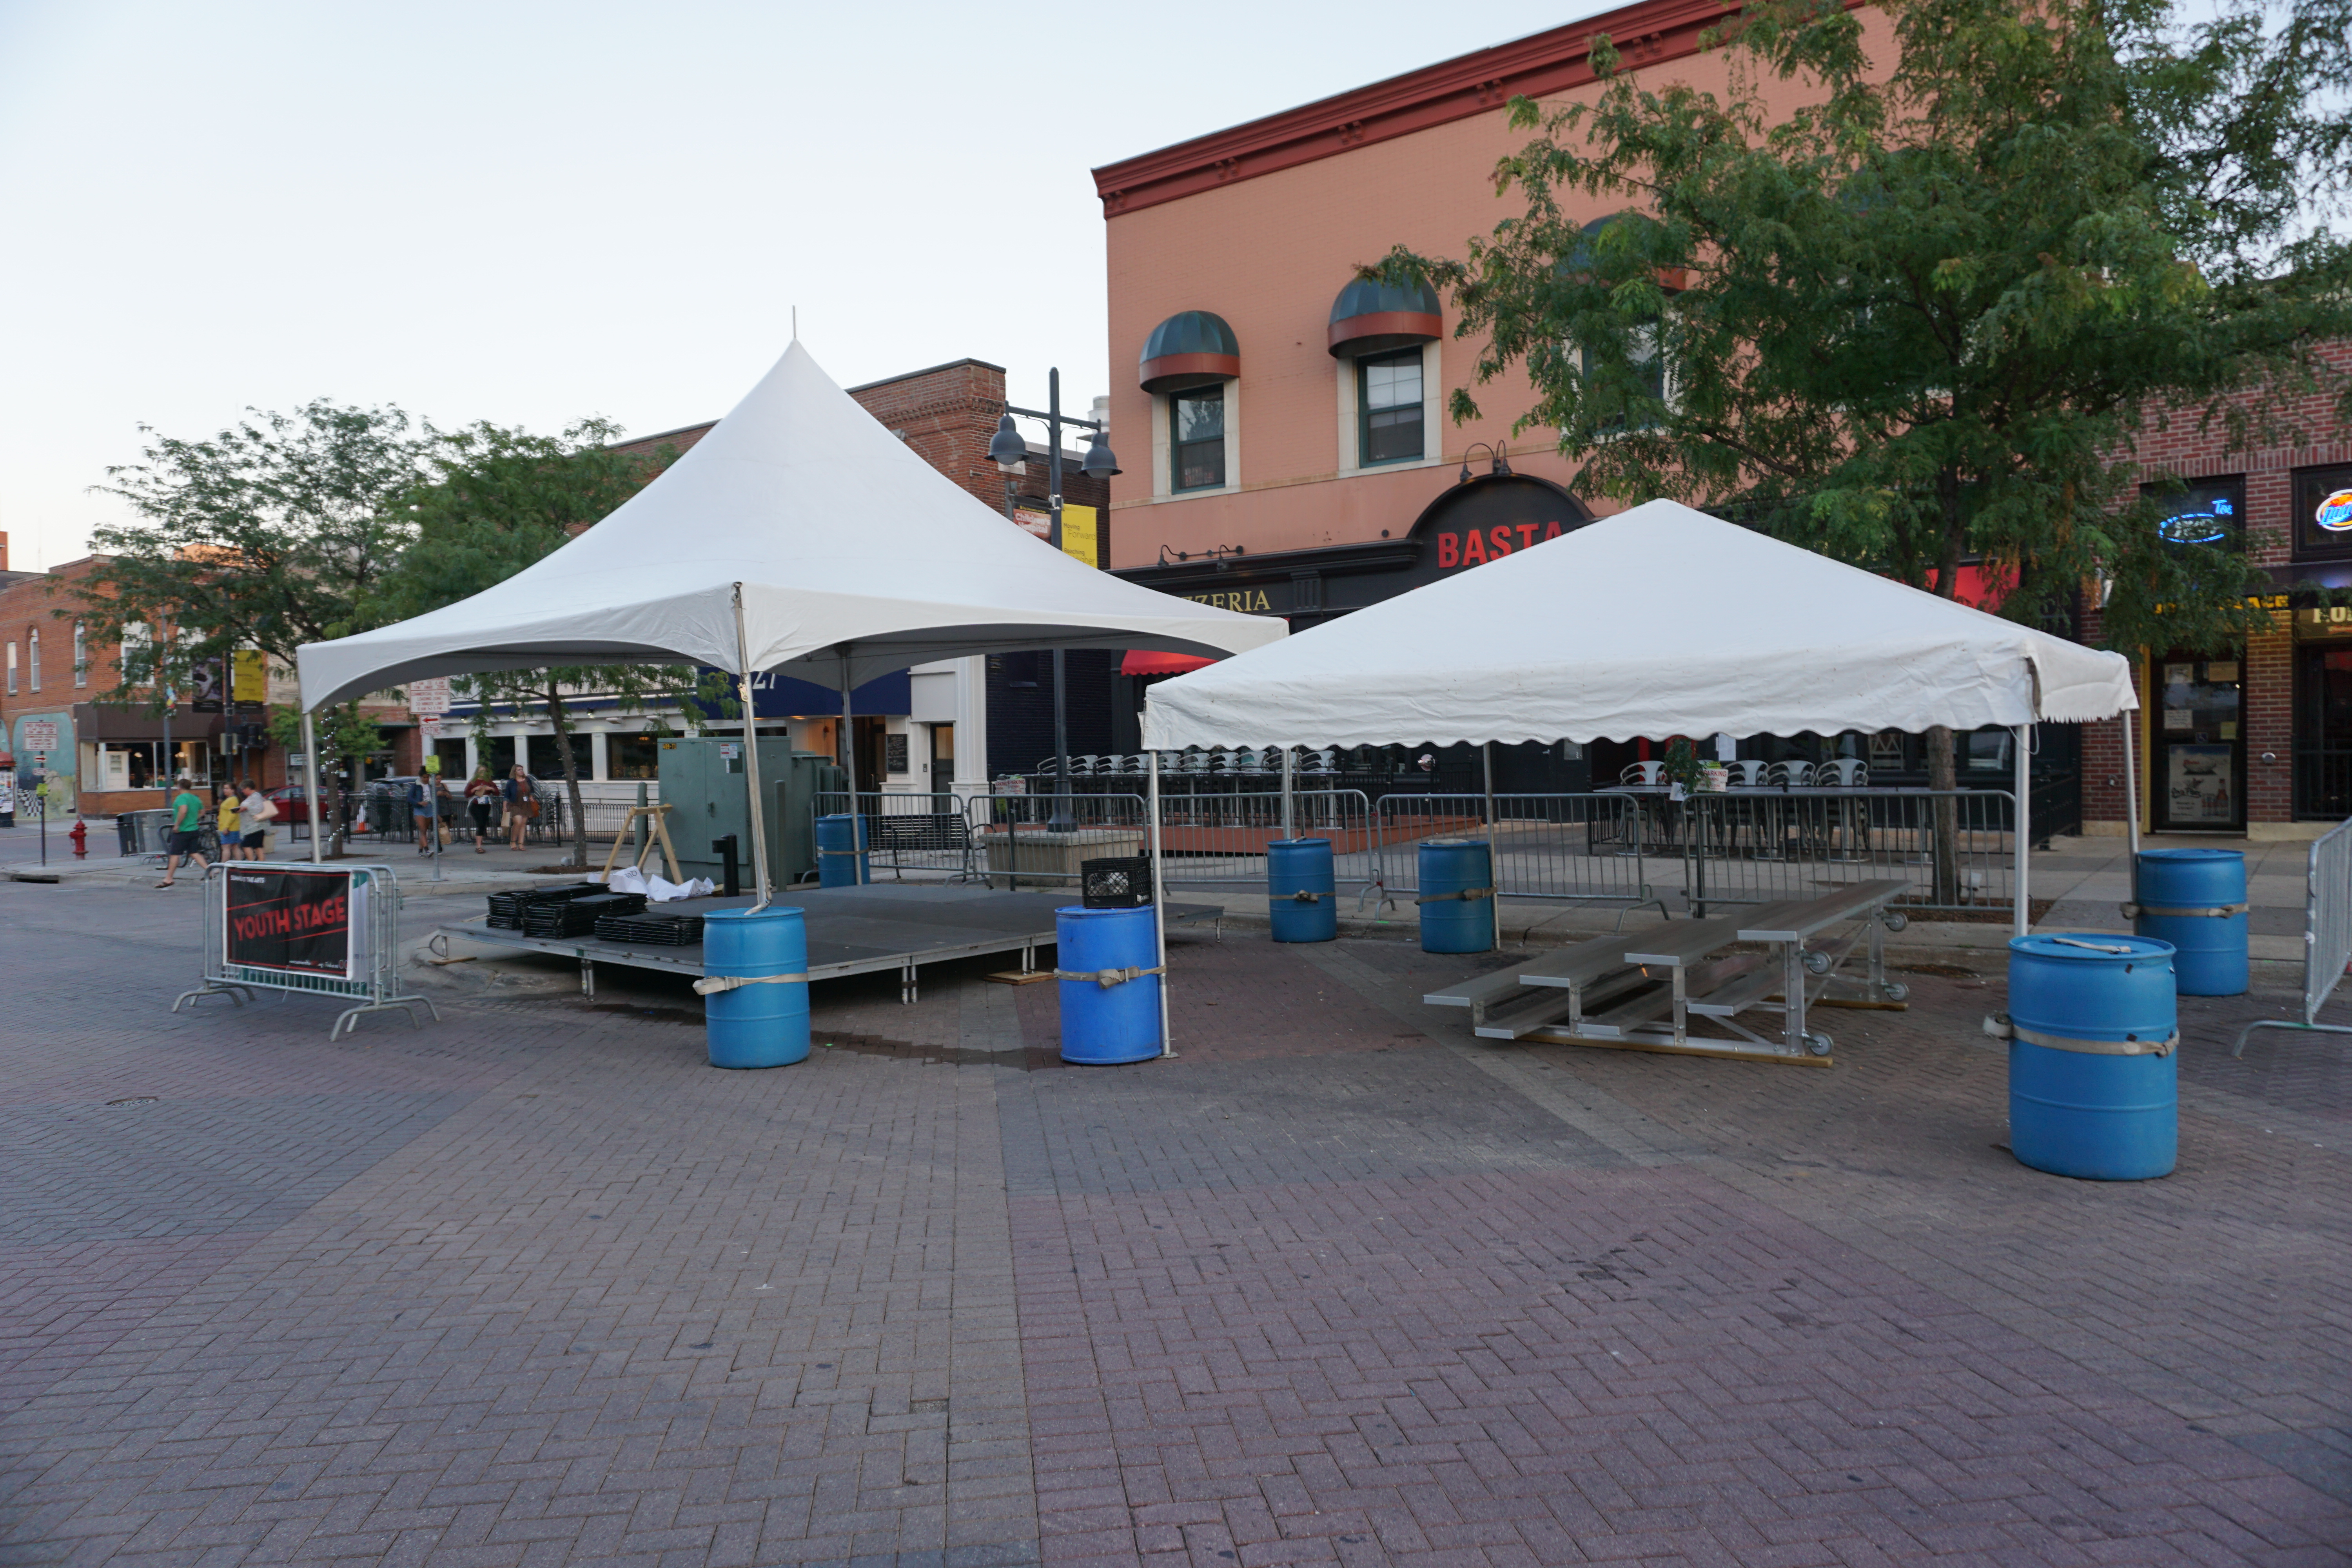 20'x20' Tentology and 20'x20' frame tent setup for the youth stage at Jazz Festival in Iowa City, IA